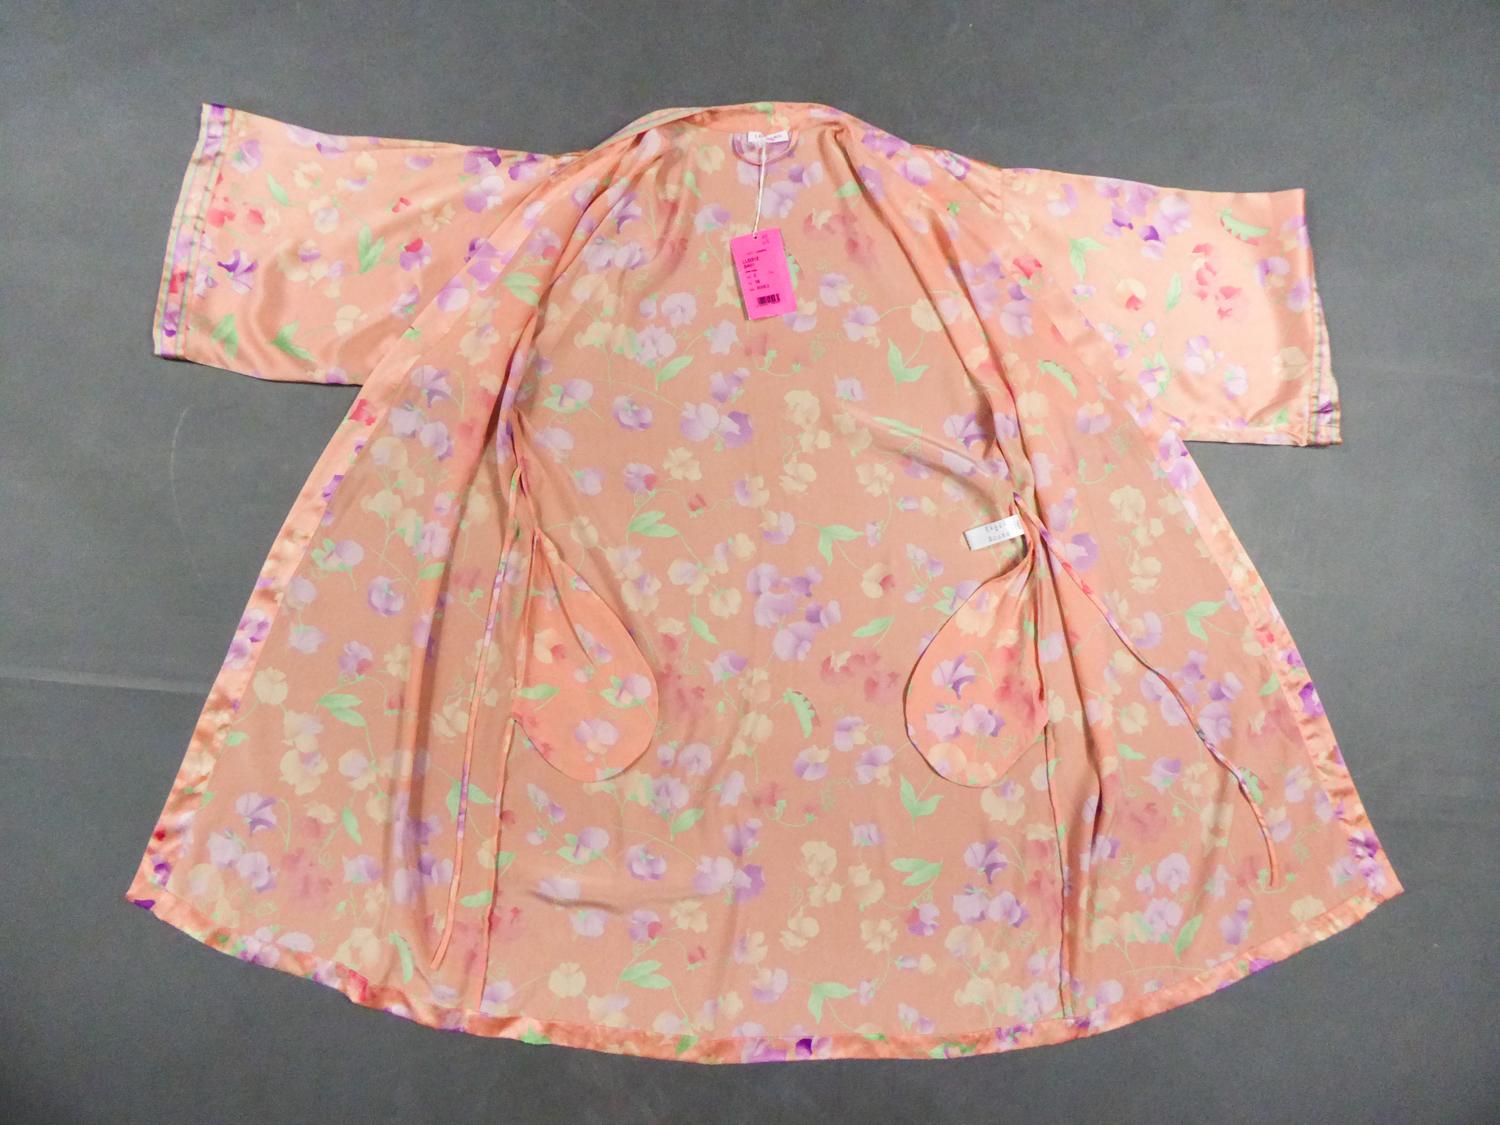 Circa 2006
France

Elegant interior robe  in printed silk satin from the house deisgner Léonard. As new, never worn, with its original label dating from 2006. Beautiful 100% salmon pink silk satin printed with Japanese flowers in a shades of pastel